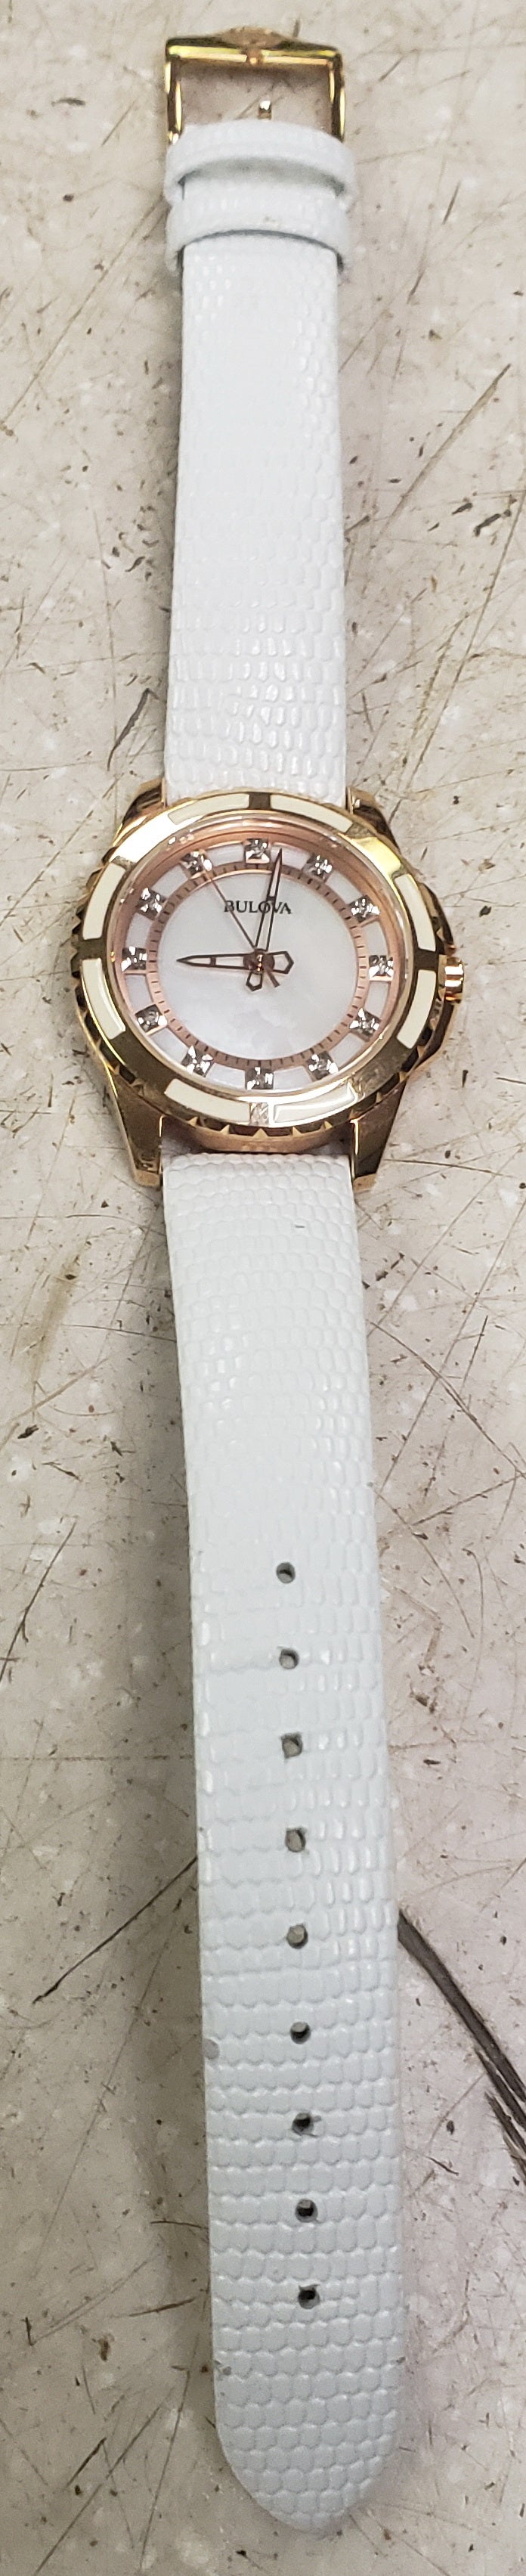 Bulova 98P119 Classic Women's Rose Gold Mother-of-Pearl Dial Watch Diamond Watch with White Leather Band